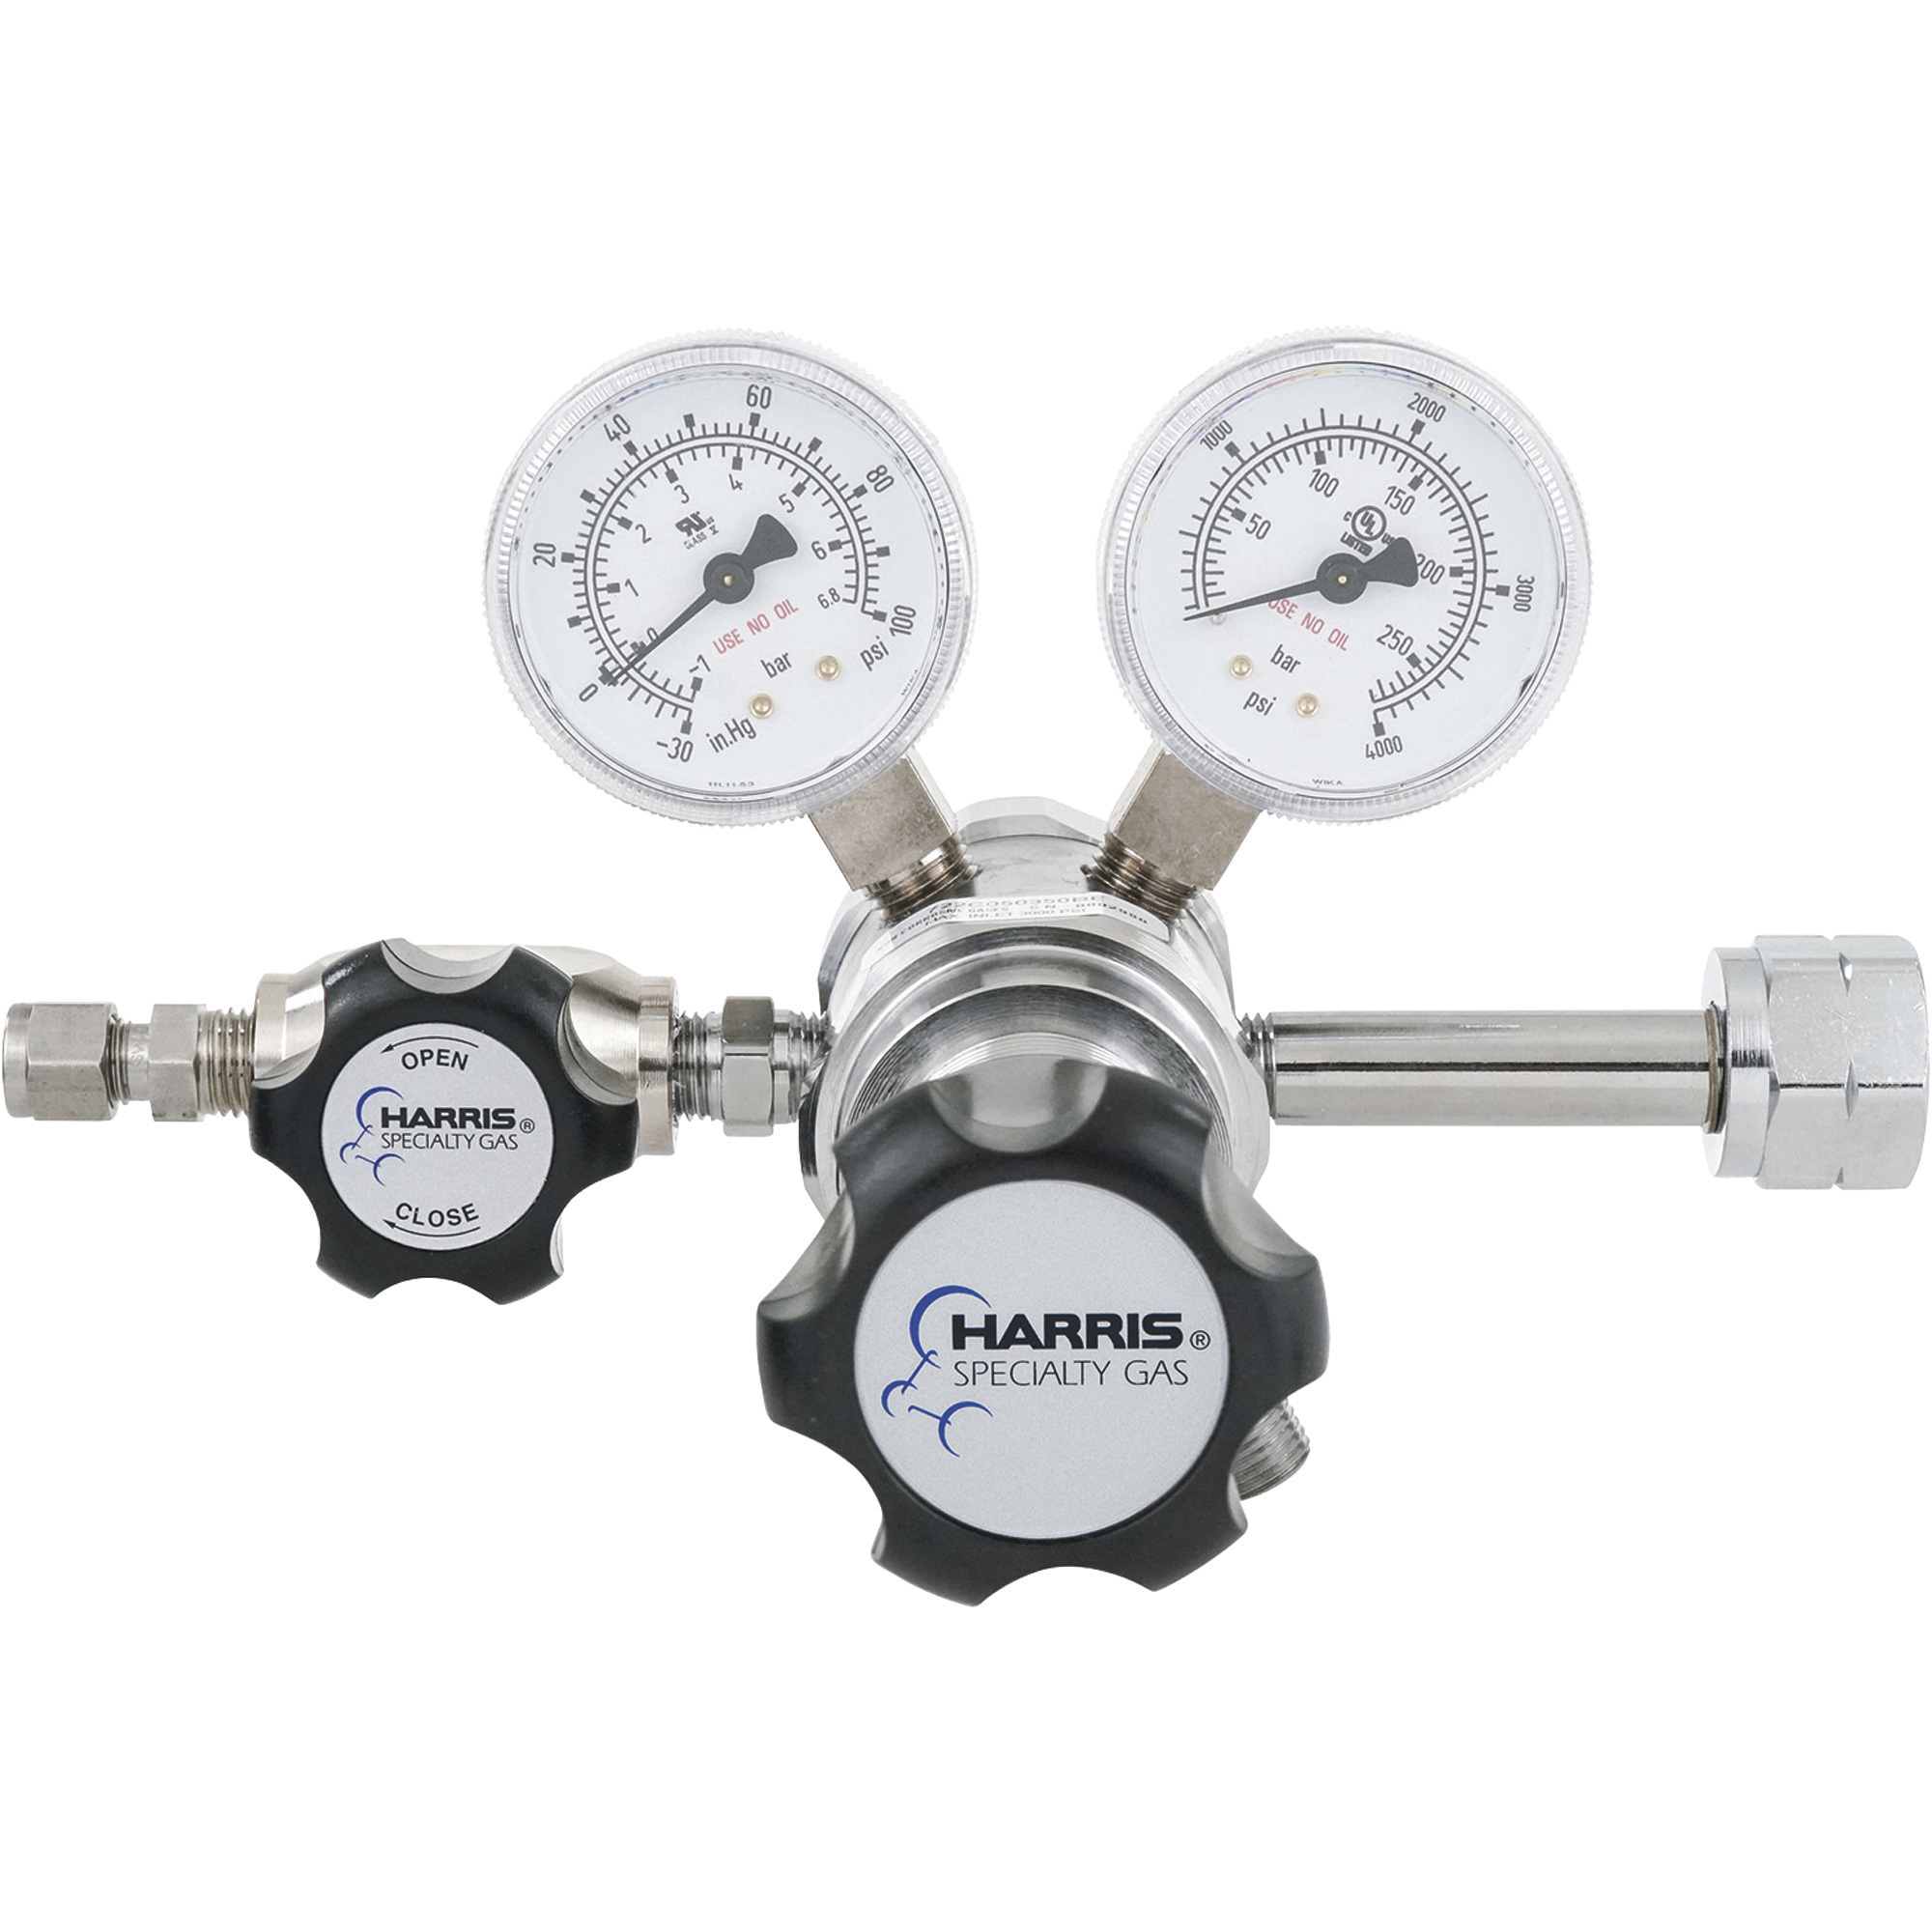 Harris Hydrogen, Methane Specialty Gas Lab Regulator — CGA 350, Two-Stage,  Chrome-Plated, 0–50 PSI, Model# HP722C-050-350-BE Northern Tool